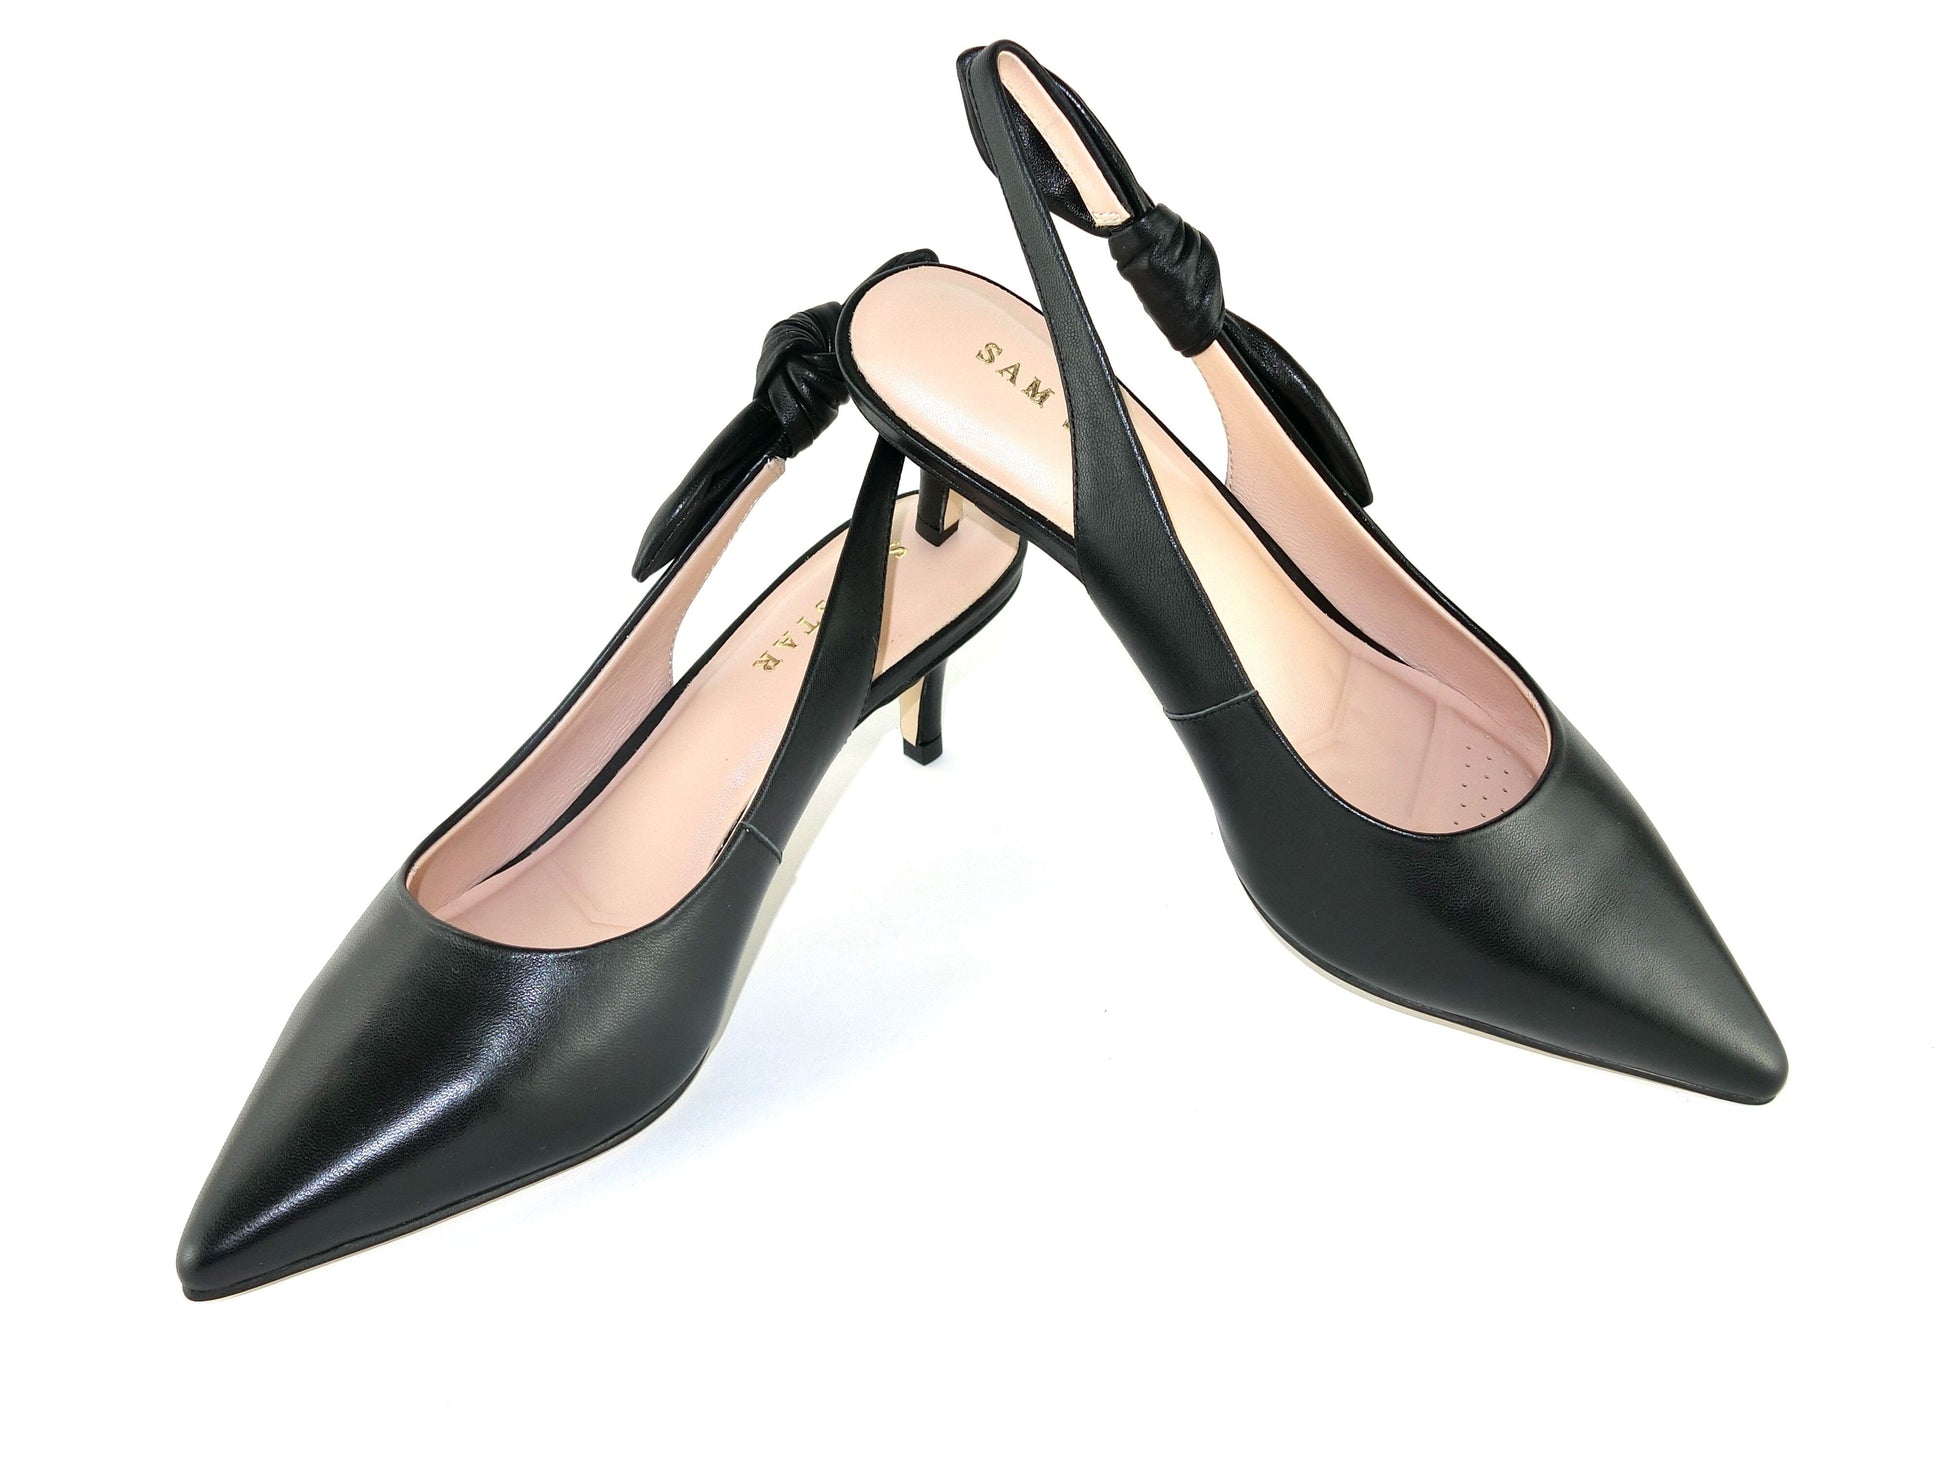 SS23006 Leather court shoes with sling back design (removable bow) Black and Beige ladies shoes Sam Star shoes Black 38/5 